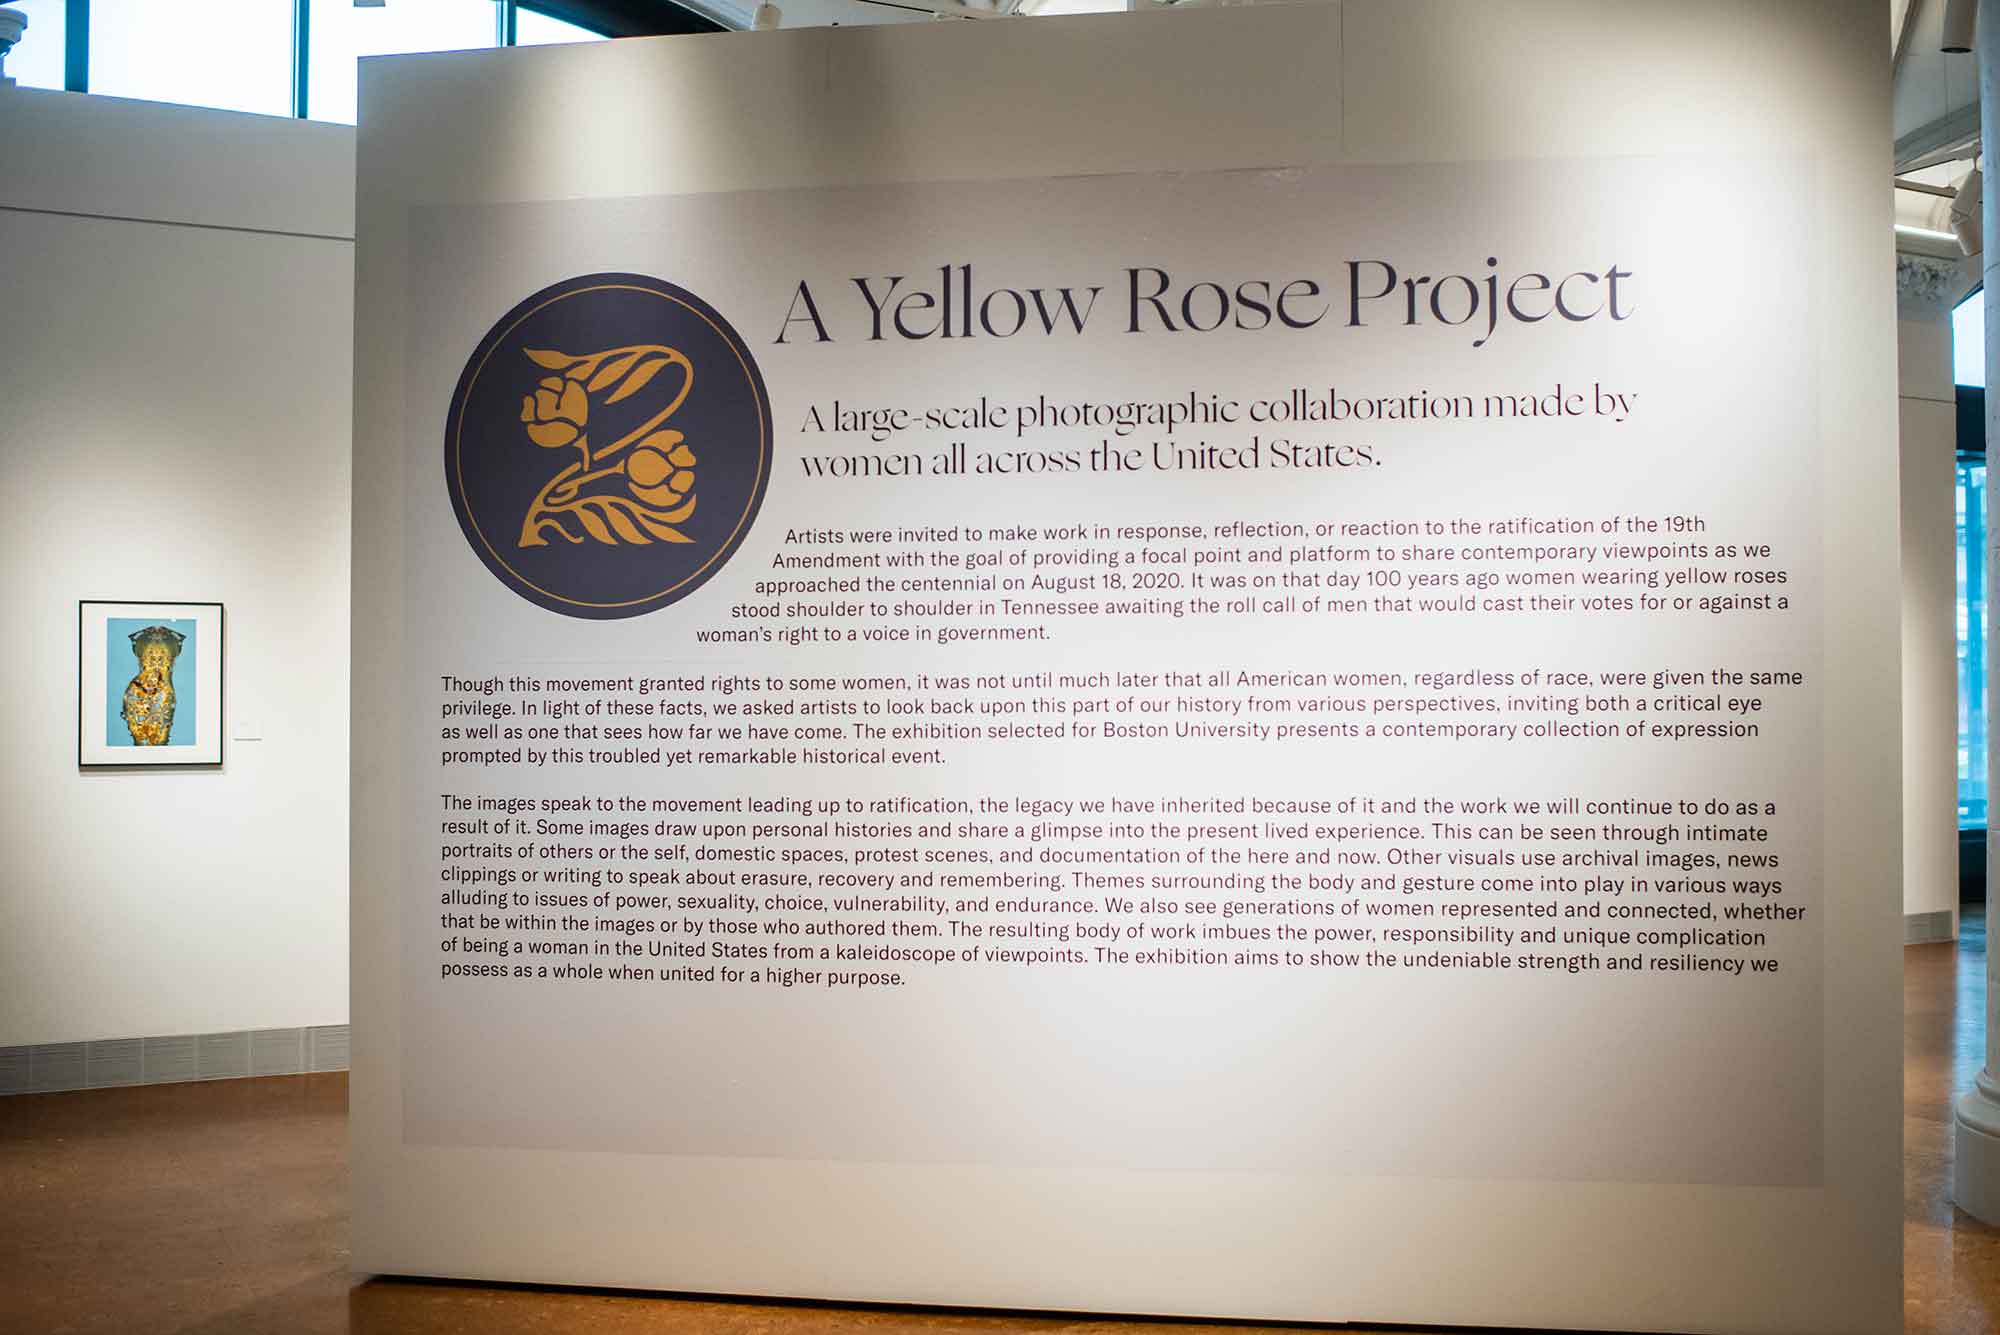 Entrance to A Yellow Rose Project exhibit at Boston University's Stone Gallery where a wall displays the curatorial statement for the exhibit.